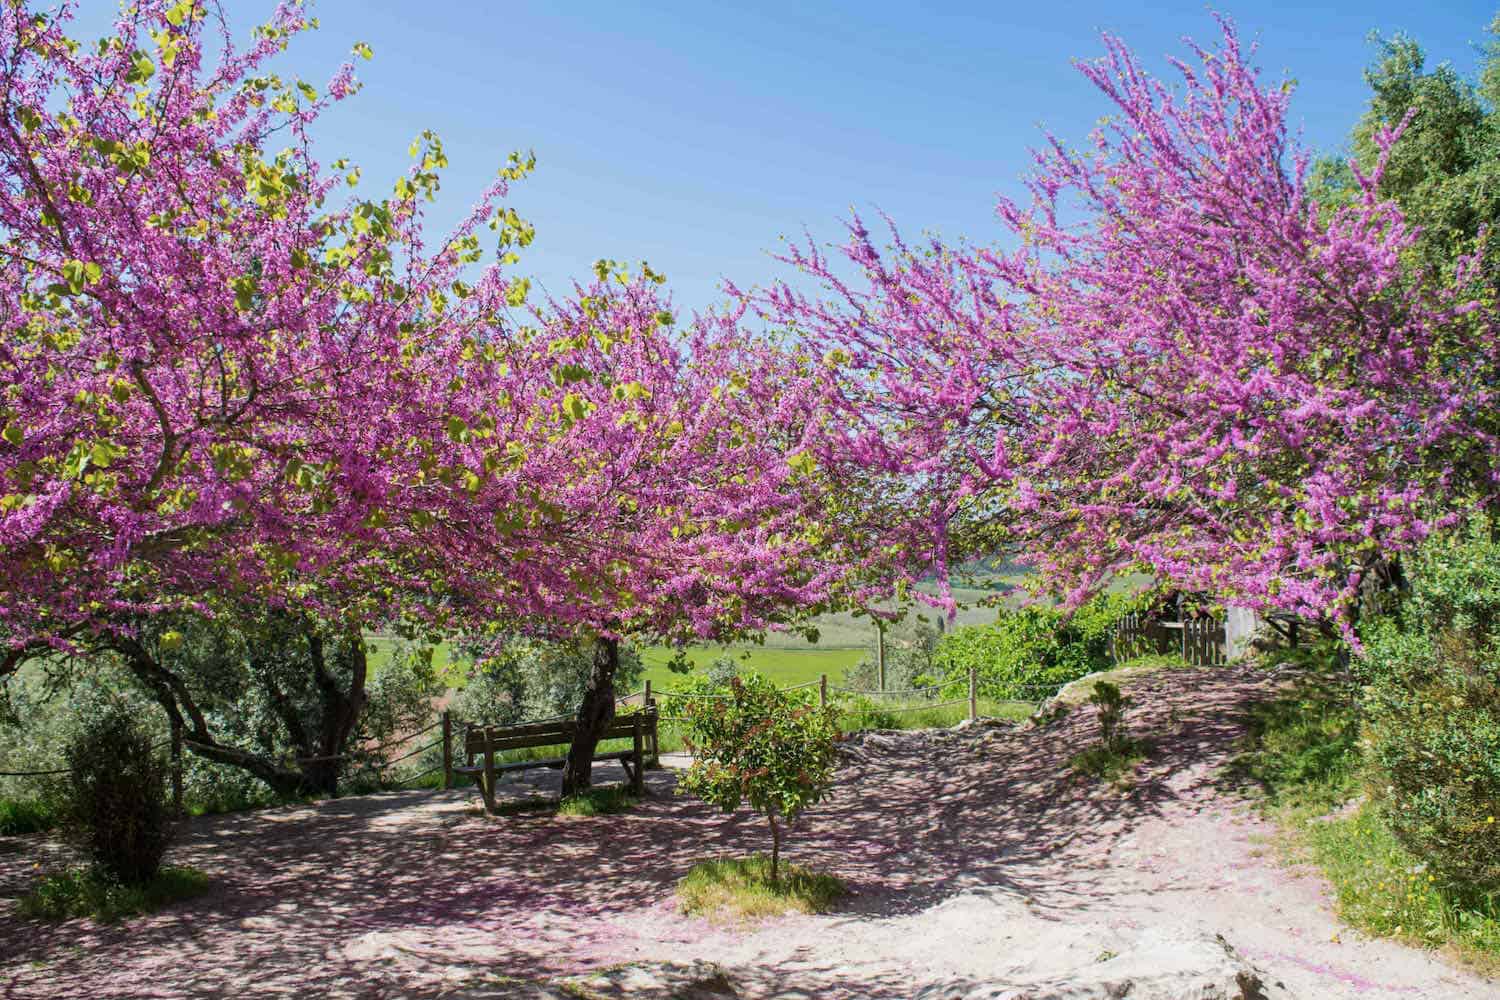 pink judas trees with a park bench sitting beneath them in Obidos, Portugal.